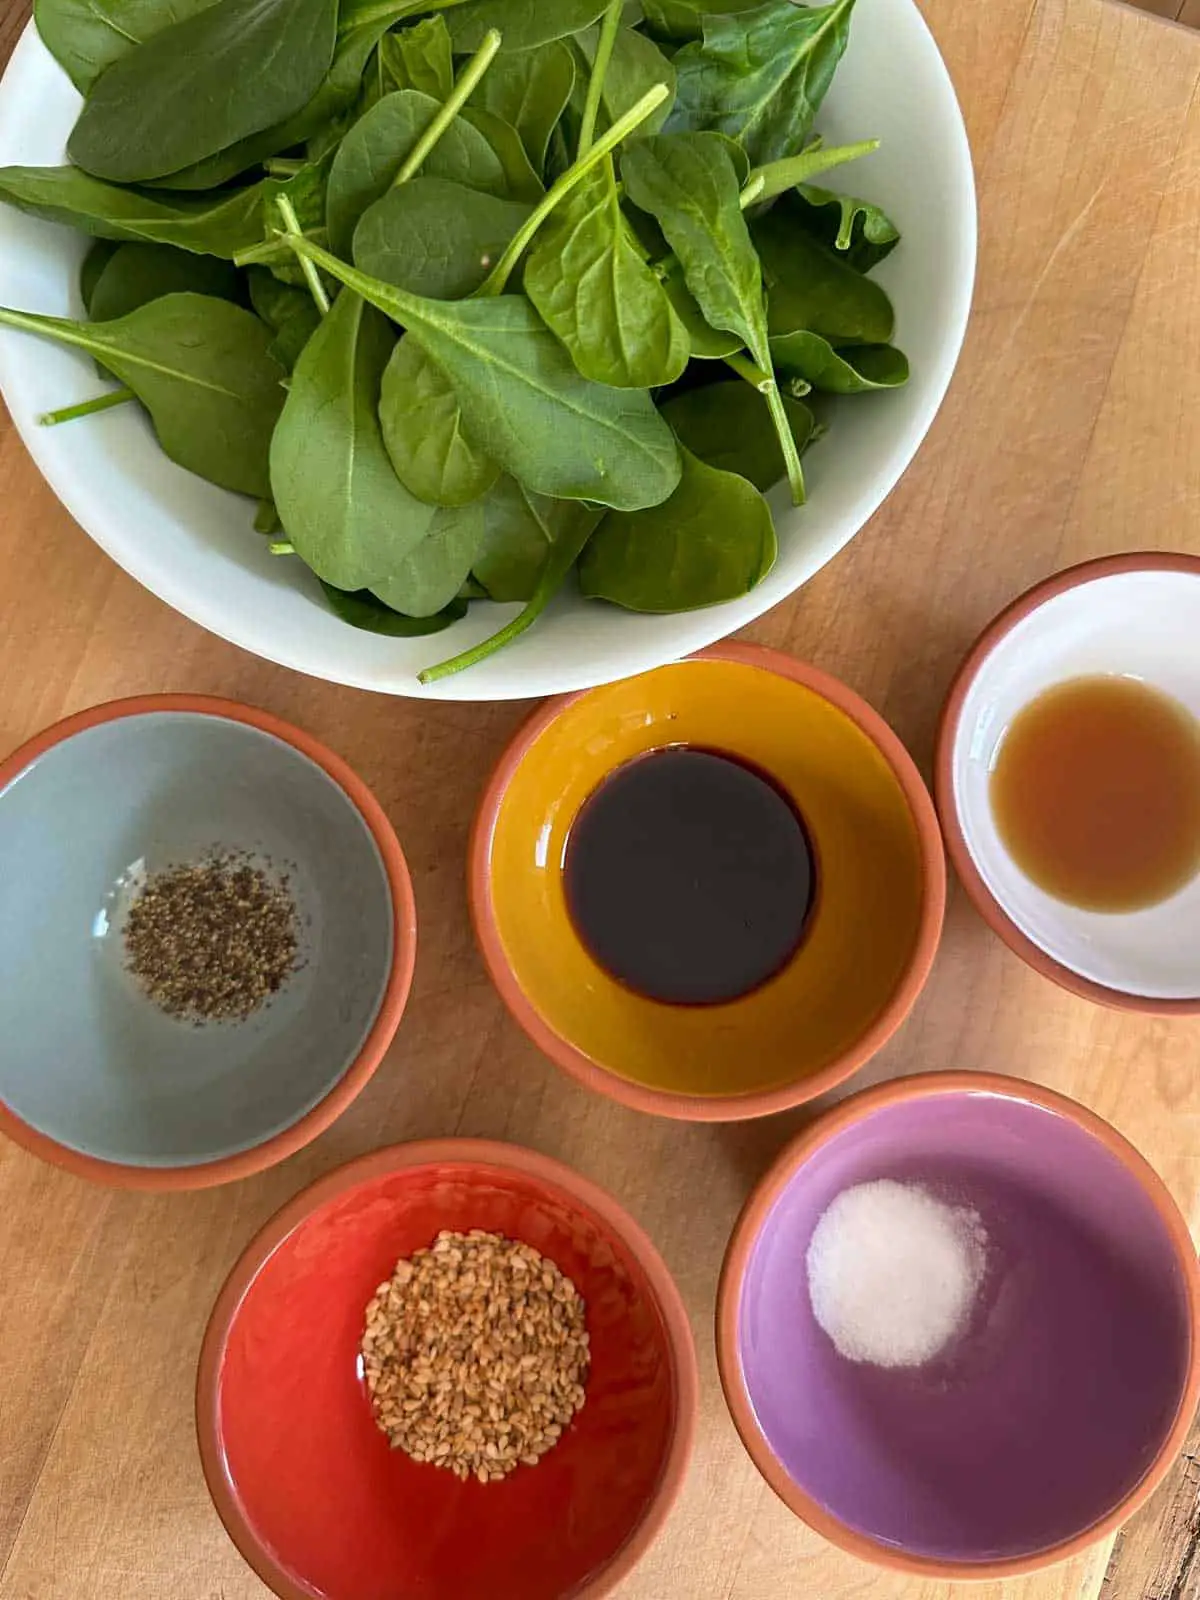 Raw baby spinach in a white bowl, small colored bowls filled with pepper, soy sauce, sesame oil, sesame seeds, and sugar respectively.